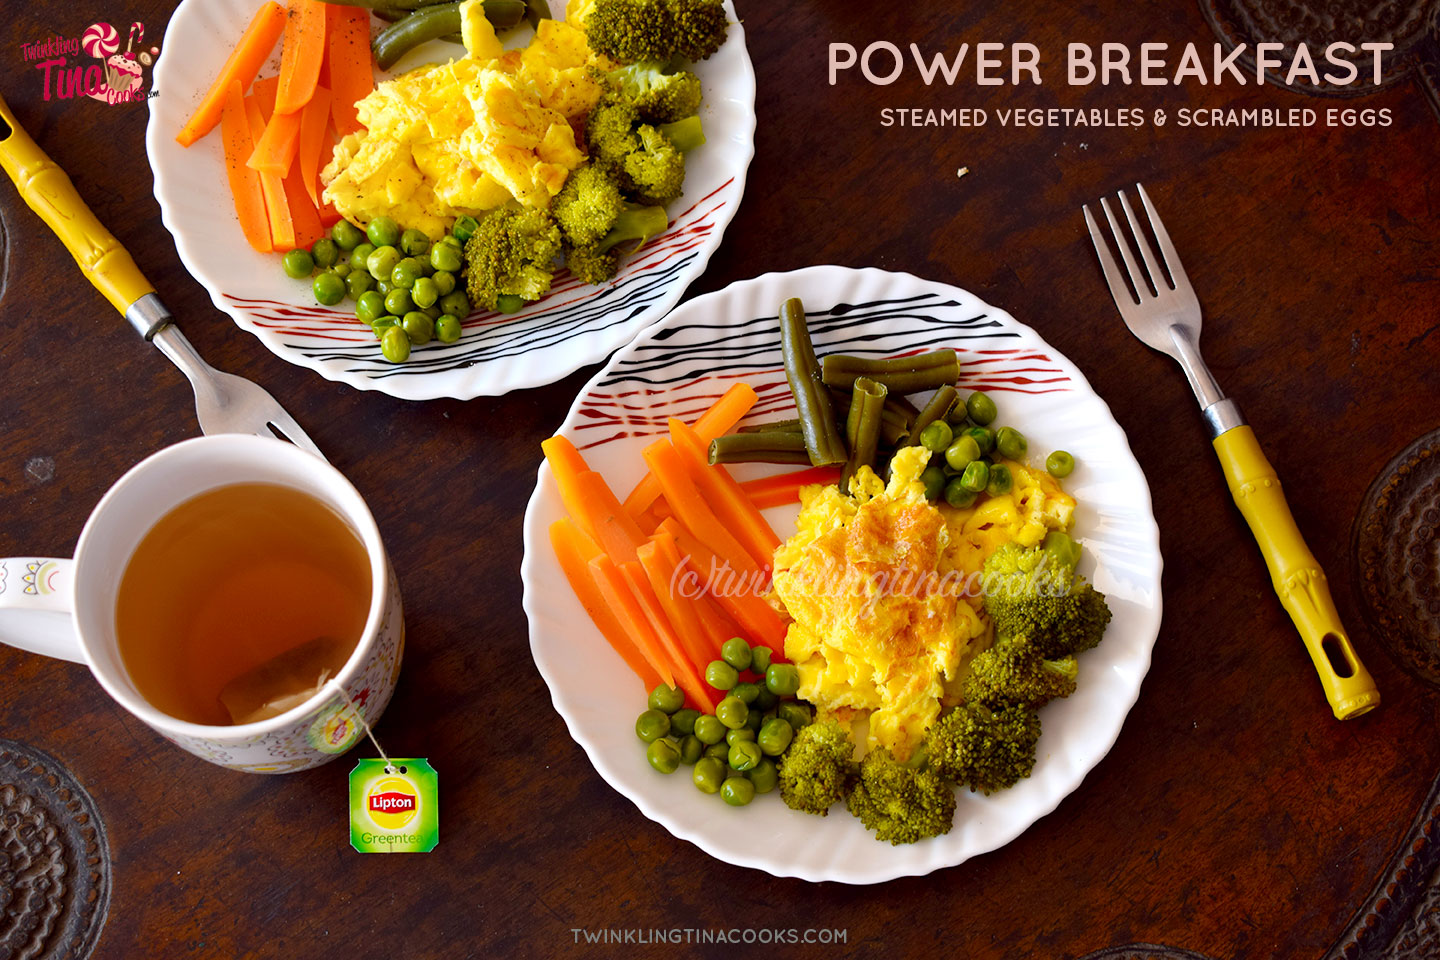 Power Breakfast Recipe Steamed Vegetables Broccoli Beans Carrots And Scrambled Eggs Twinkling Tina Cooks,How To Blanch Almonds In Thermomix